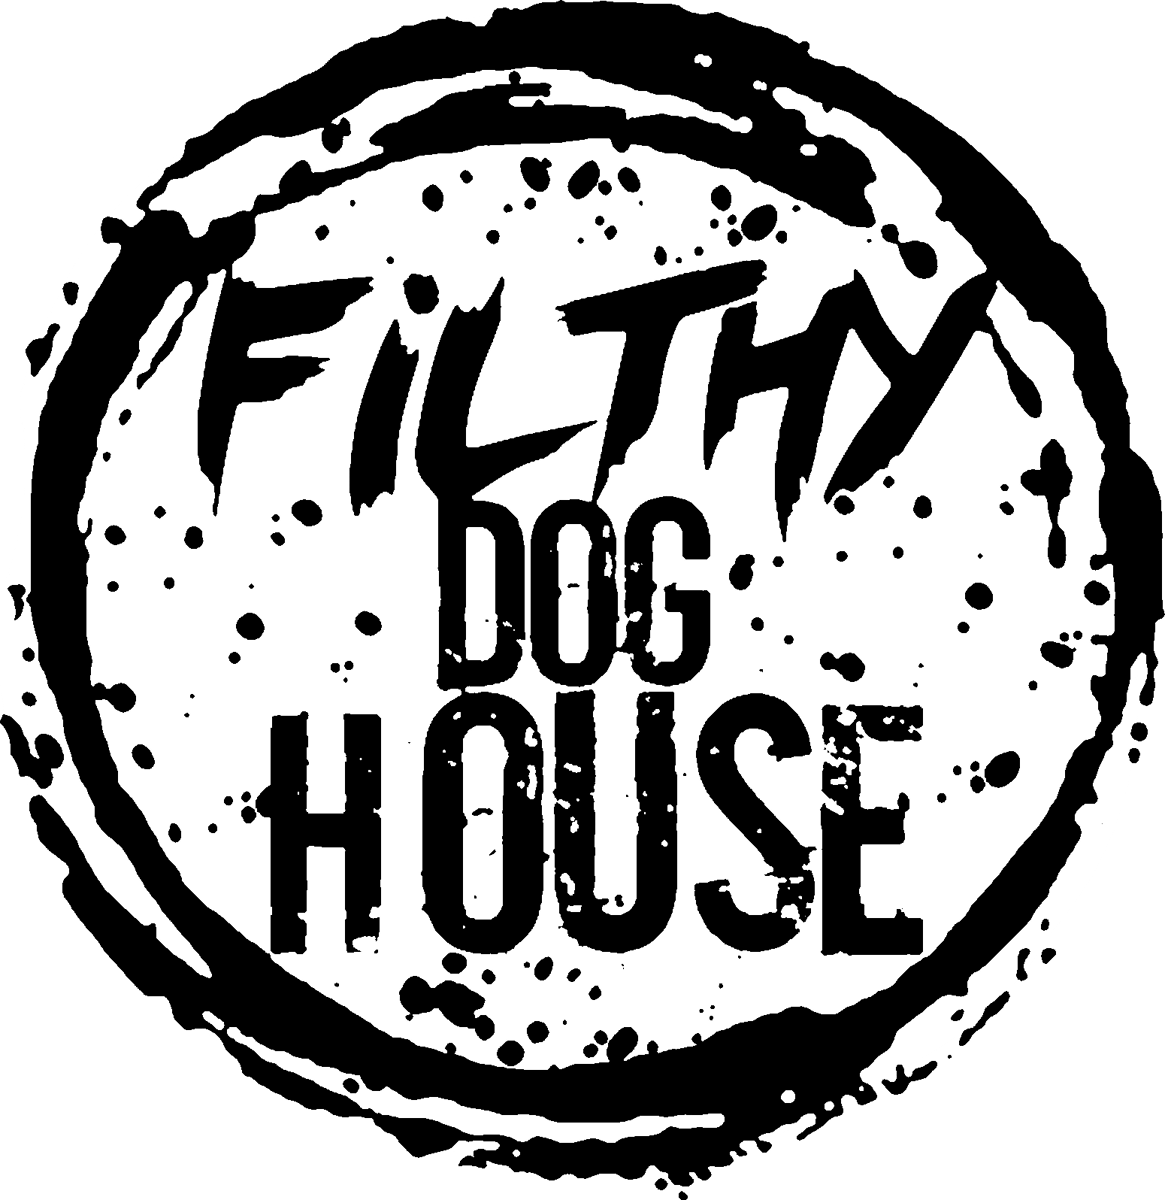 Filthy Dog House